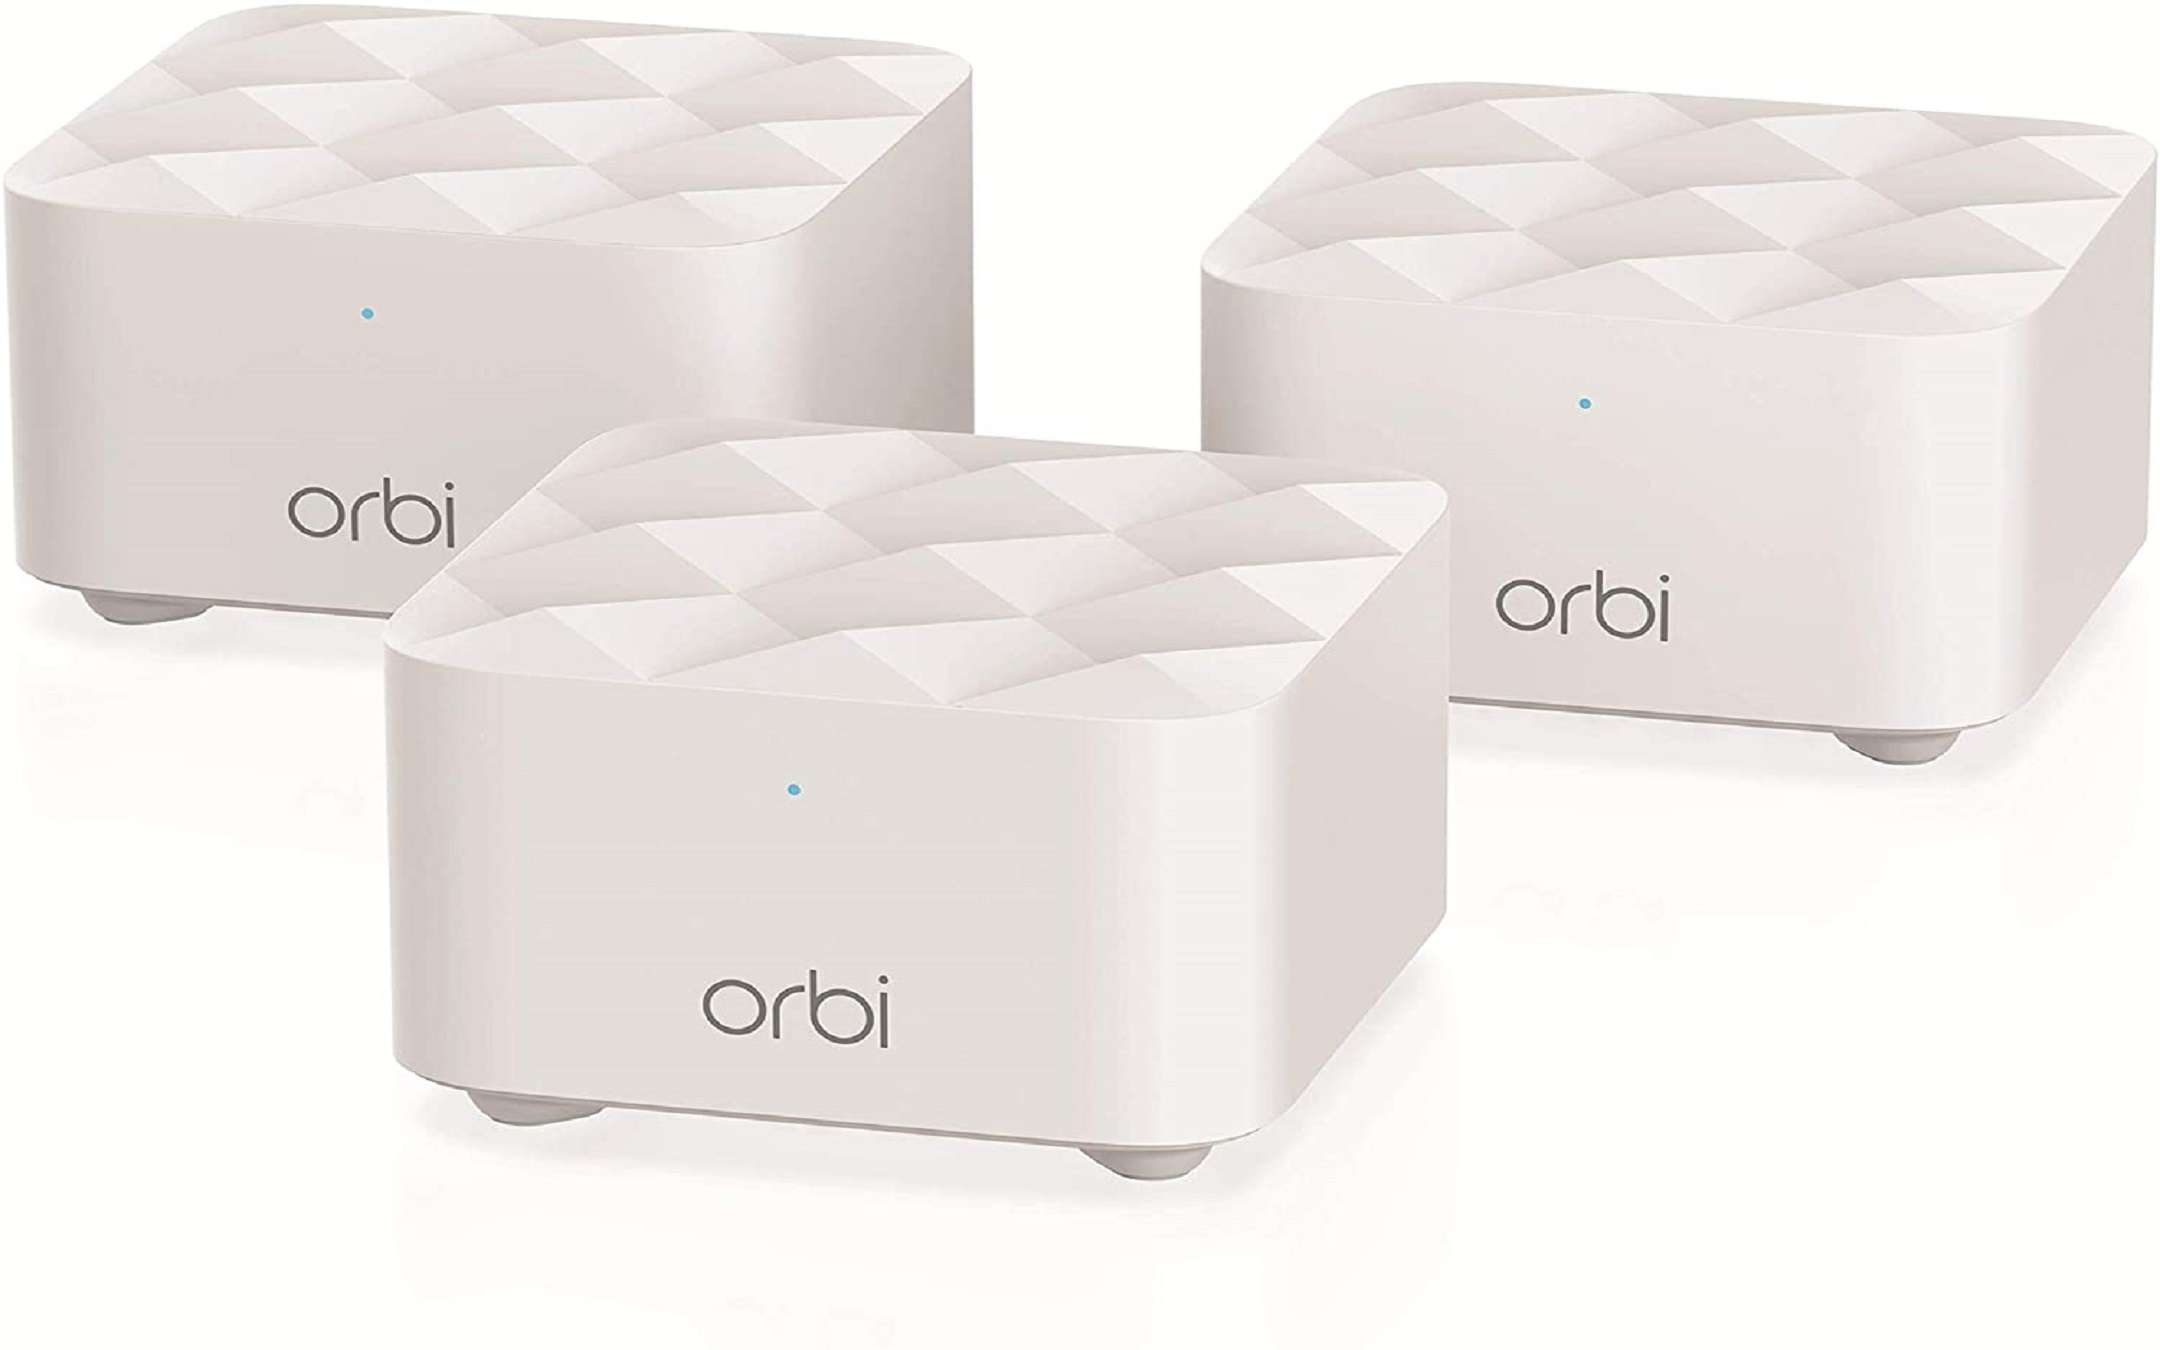 Netgear Orbi kit for mesh networks: exceptional discount!